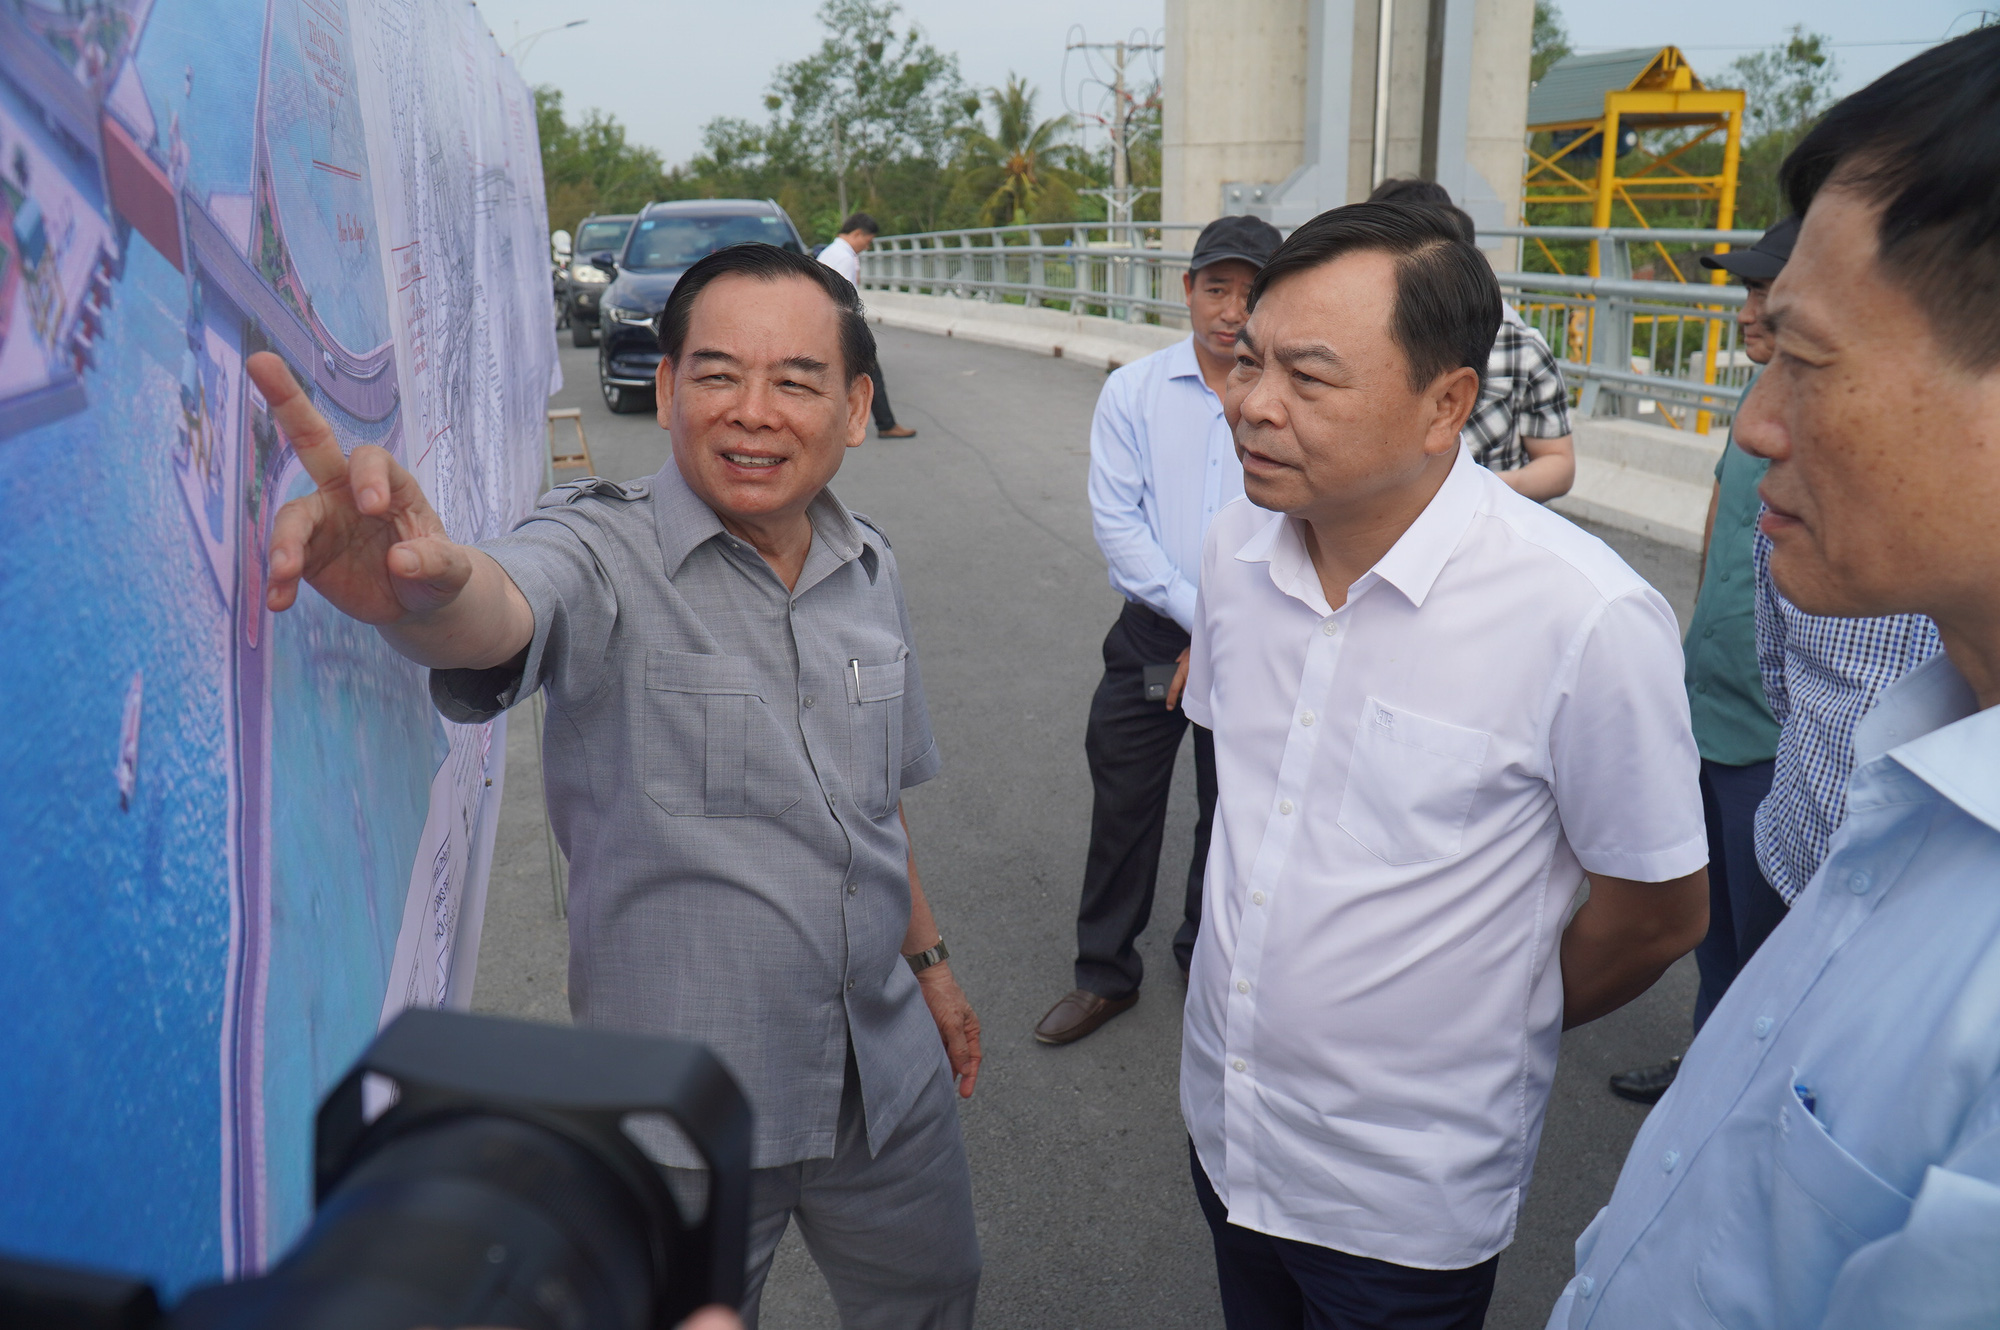 Tran Ngoc Tam (L), chairman of the People’s Committee of Ben Tre Province, discusses saline intrusion prevention measures with Deputy Minister of Agriculture and Rural Development Nguyen Hoang Hiep (C) during an inspection in Ben Tre Province on March 12, 2024. Photo: Mau Truong / Tuoi Tre